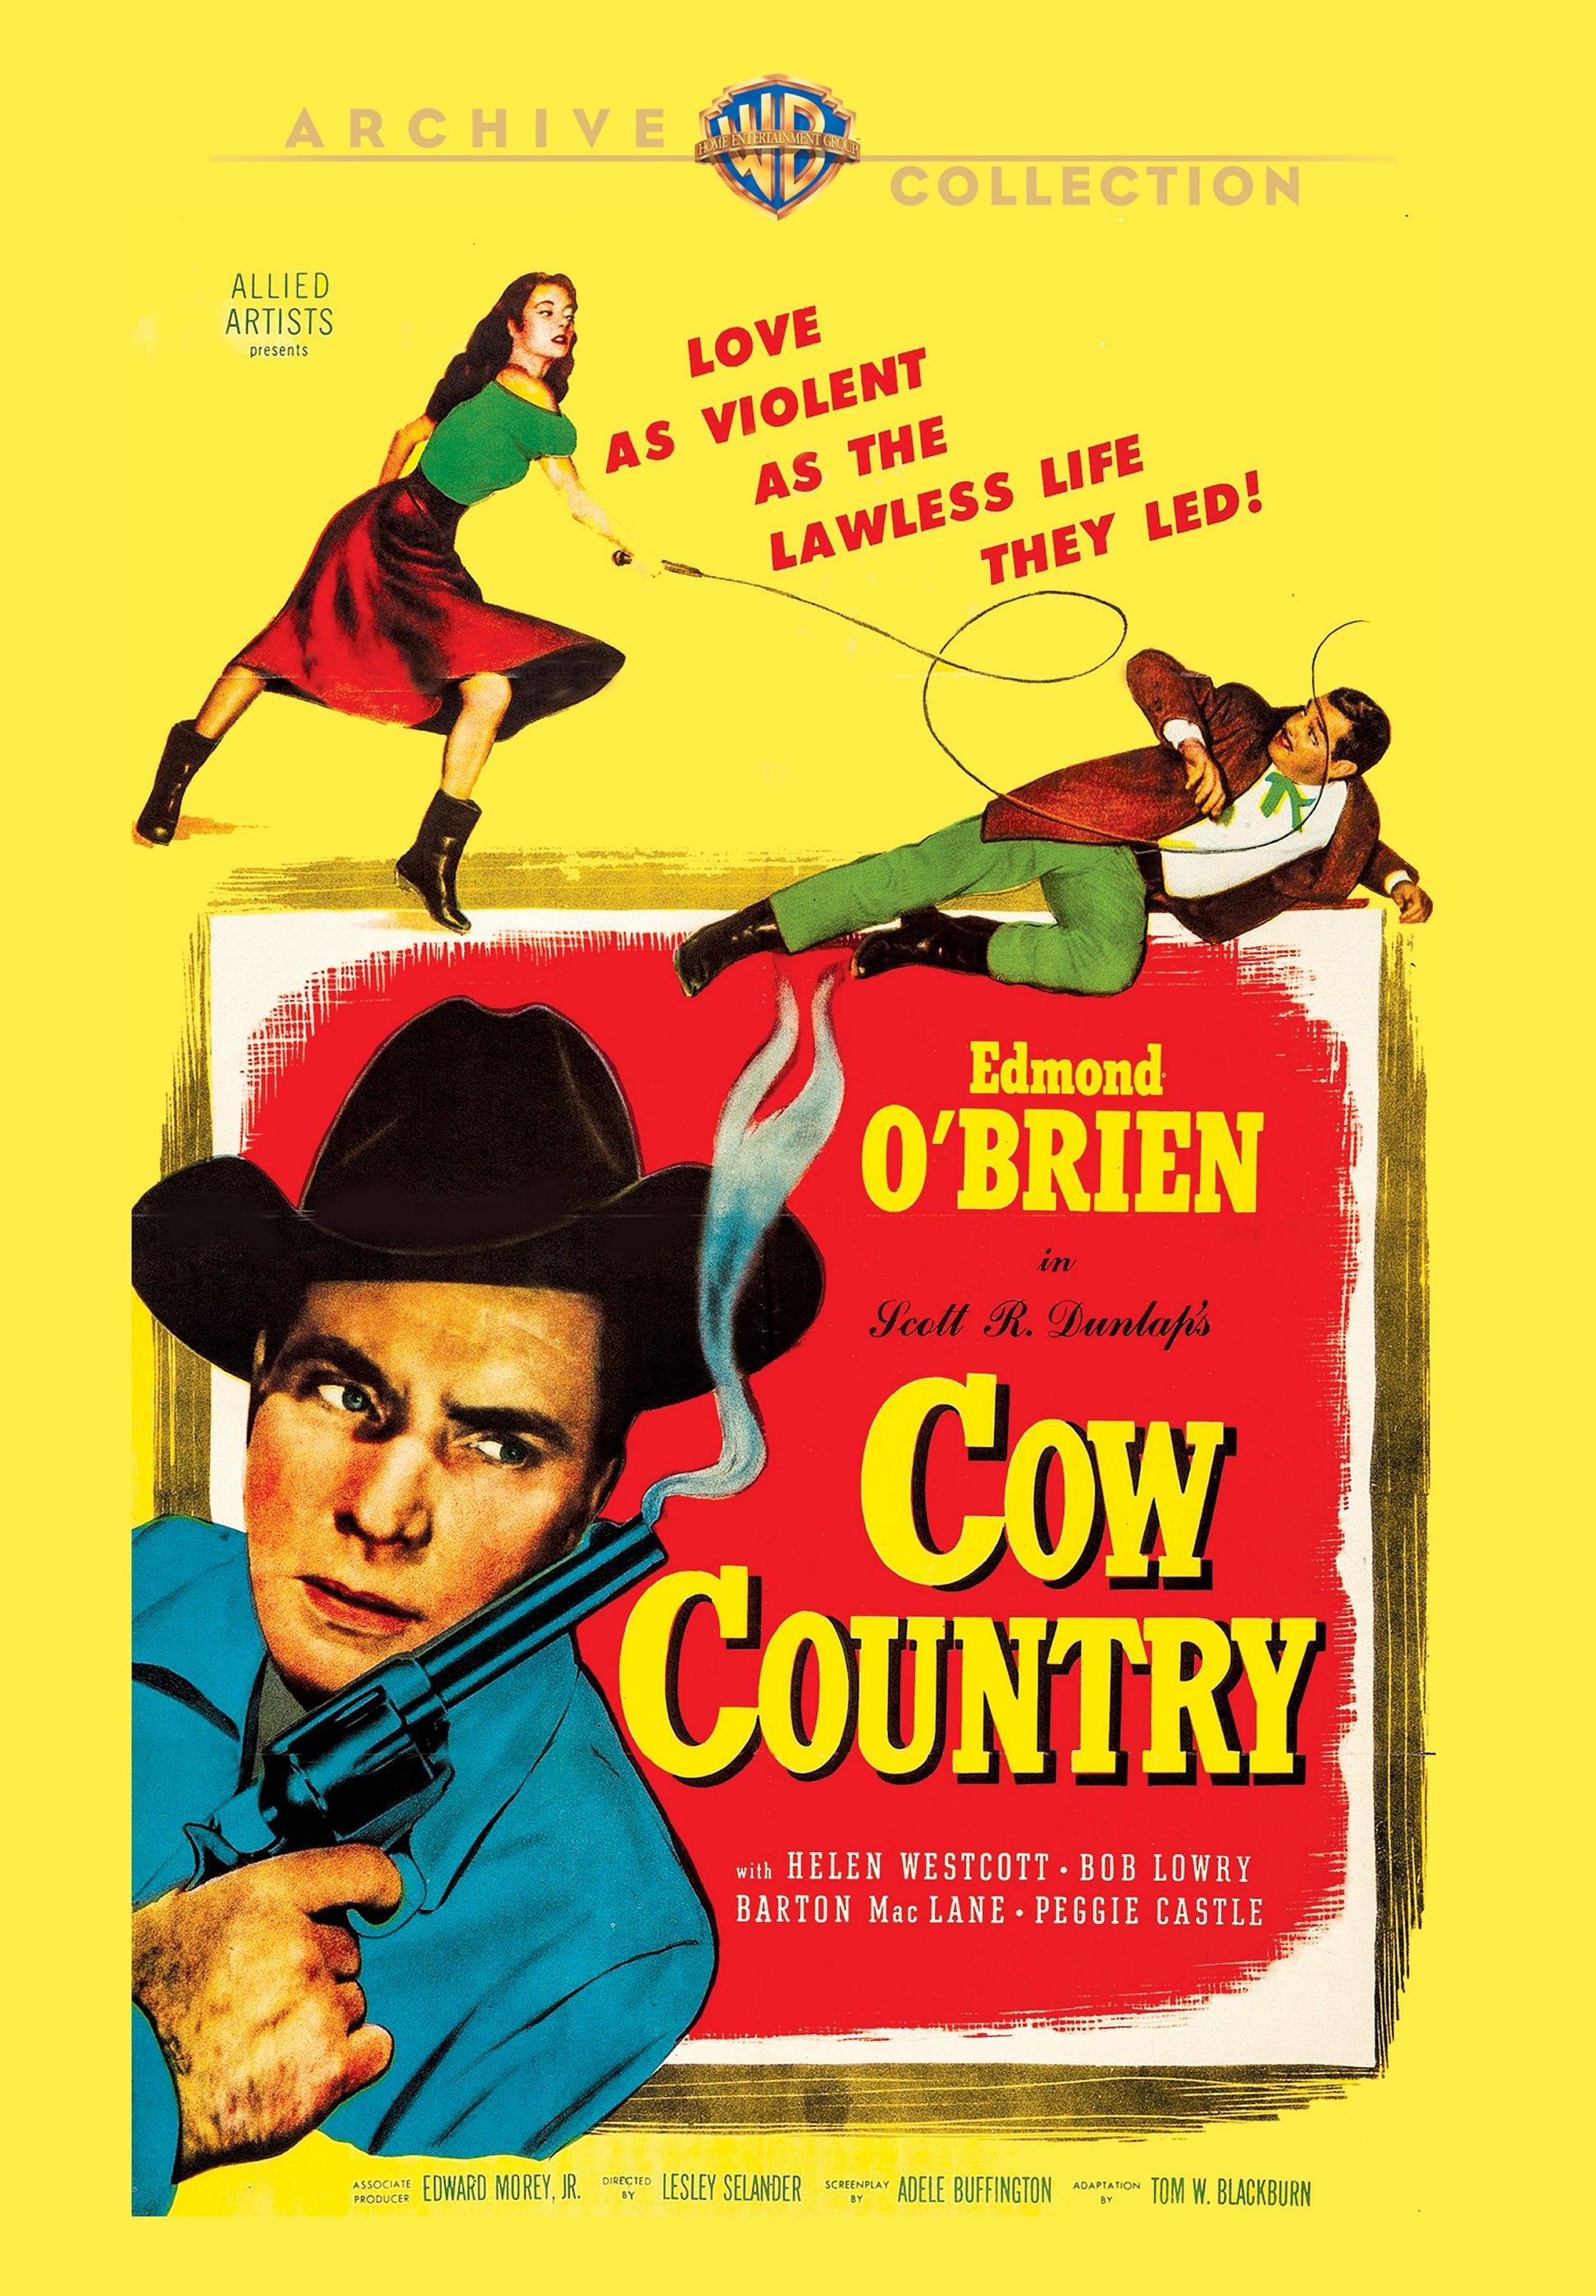 Cow Country cover art